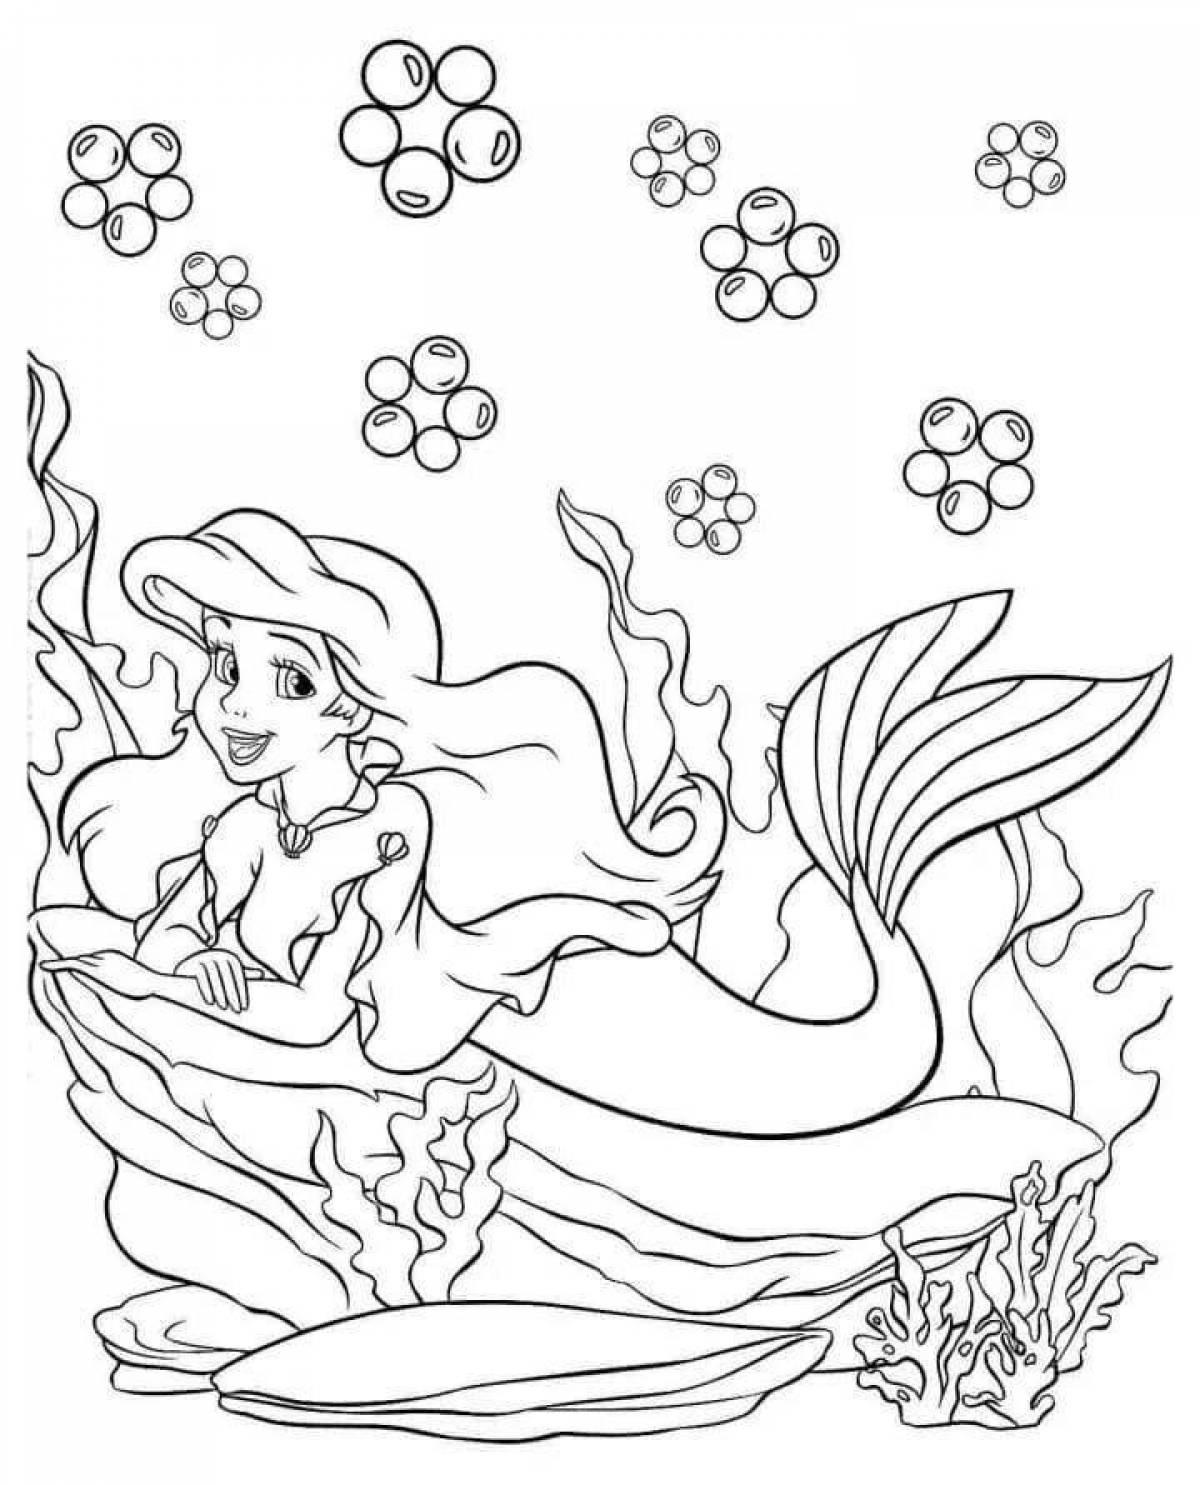 Magic coloring mermaid for children 4-5 years old